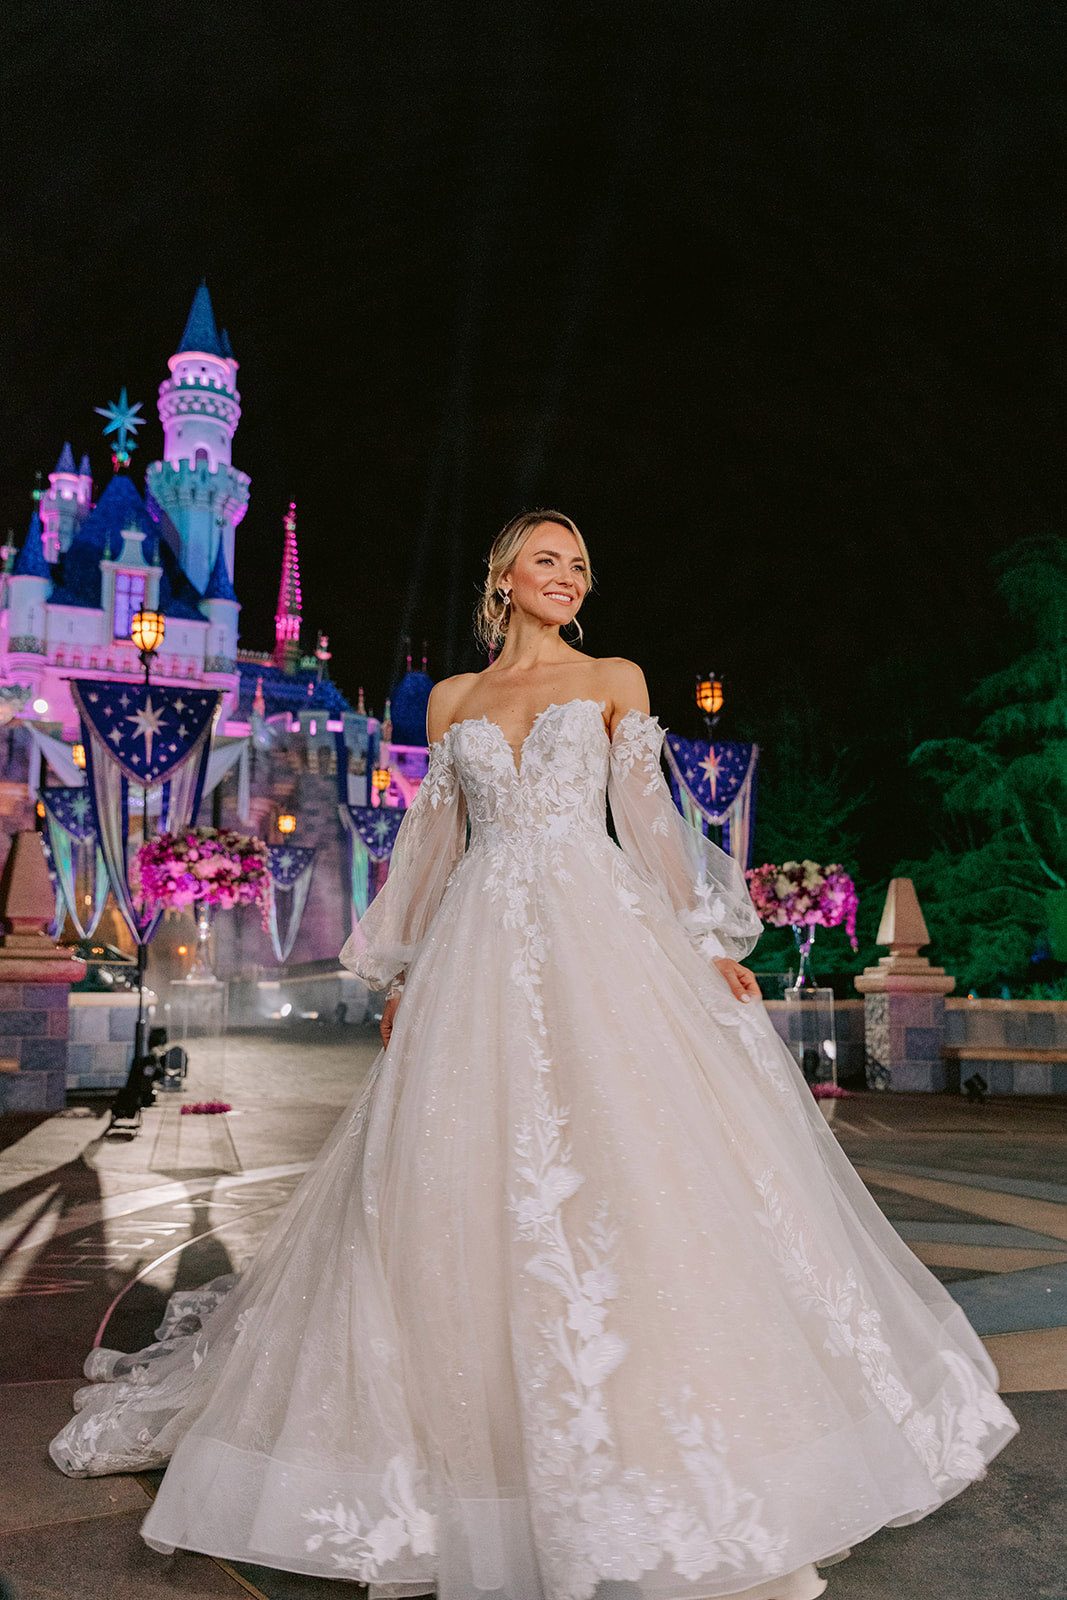 Dreams Come True So Dress Your Love Story. We Invite You To Discover Your  Dream Dress. Your Best Day Ever Awaits. Book Your In-Store Appointment at  Debbie's Bridal Text Us 213-614-0740 Disney